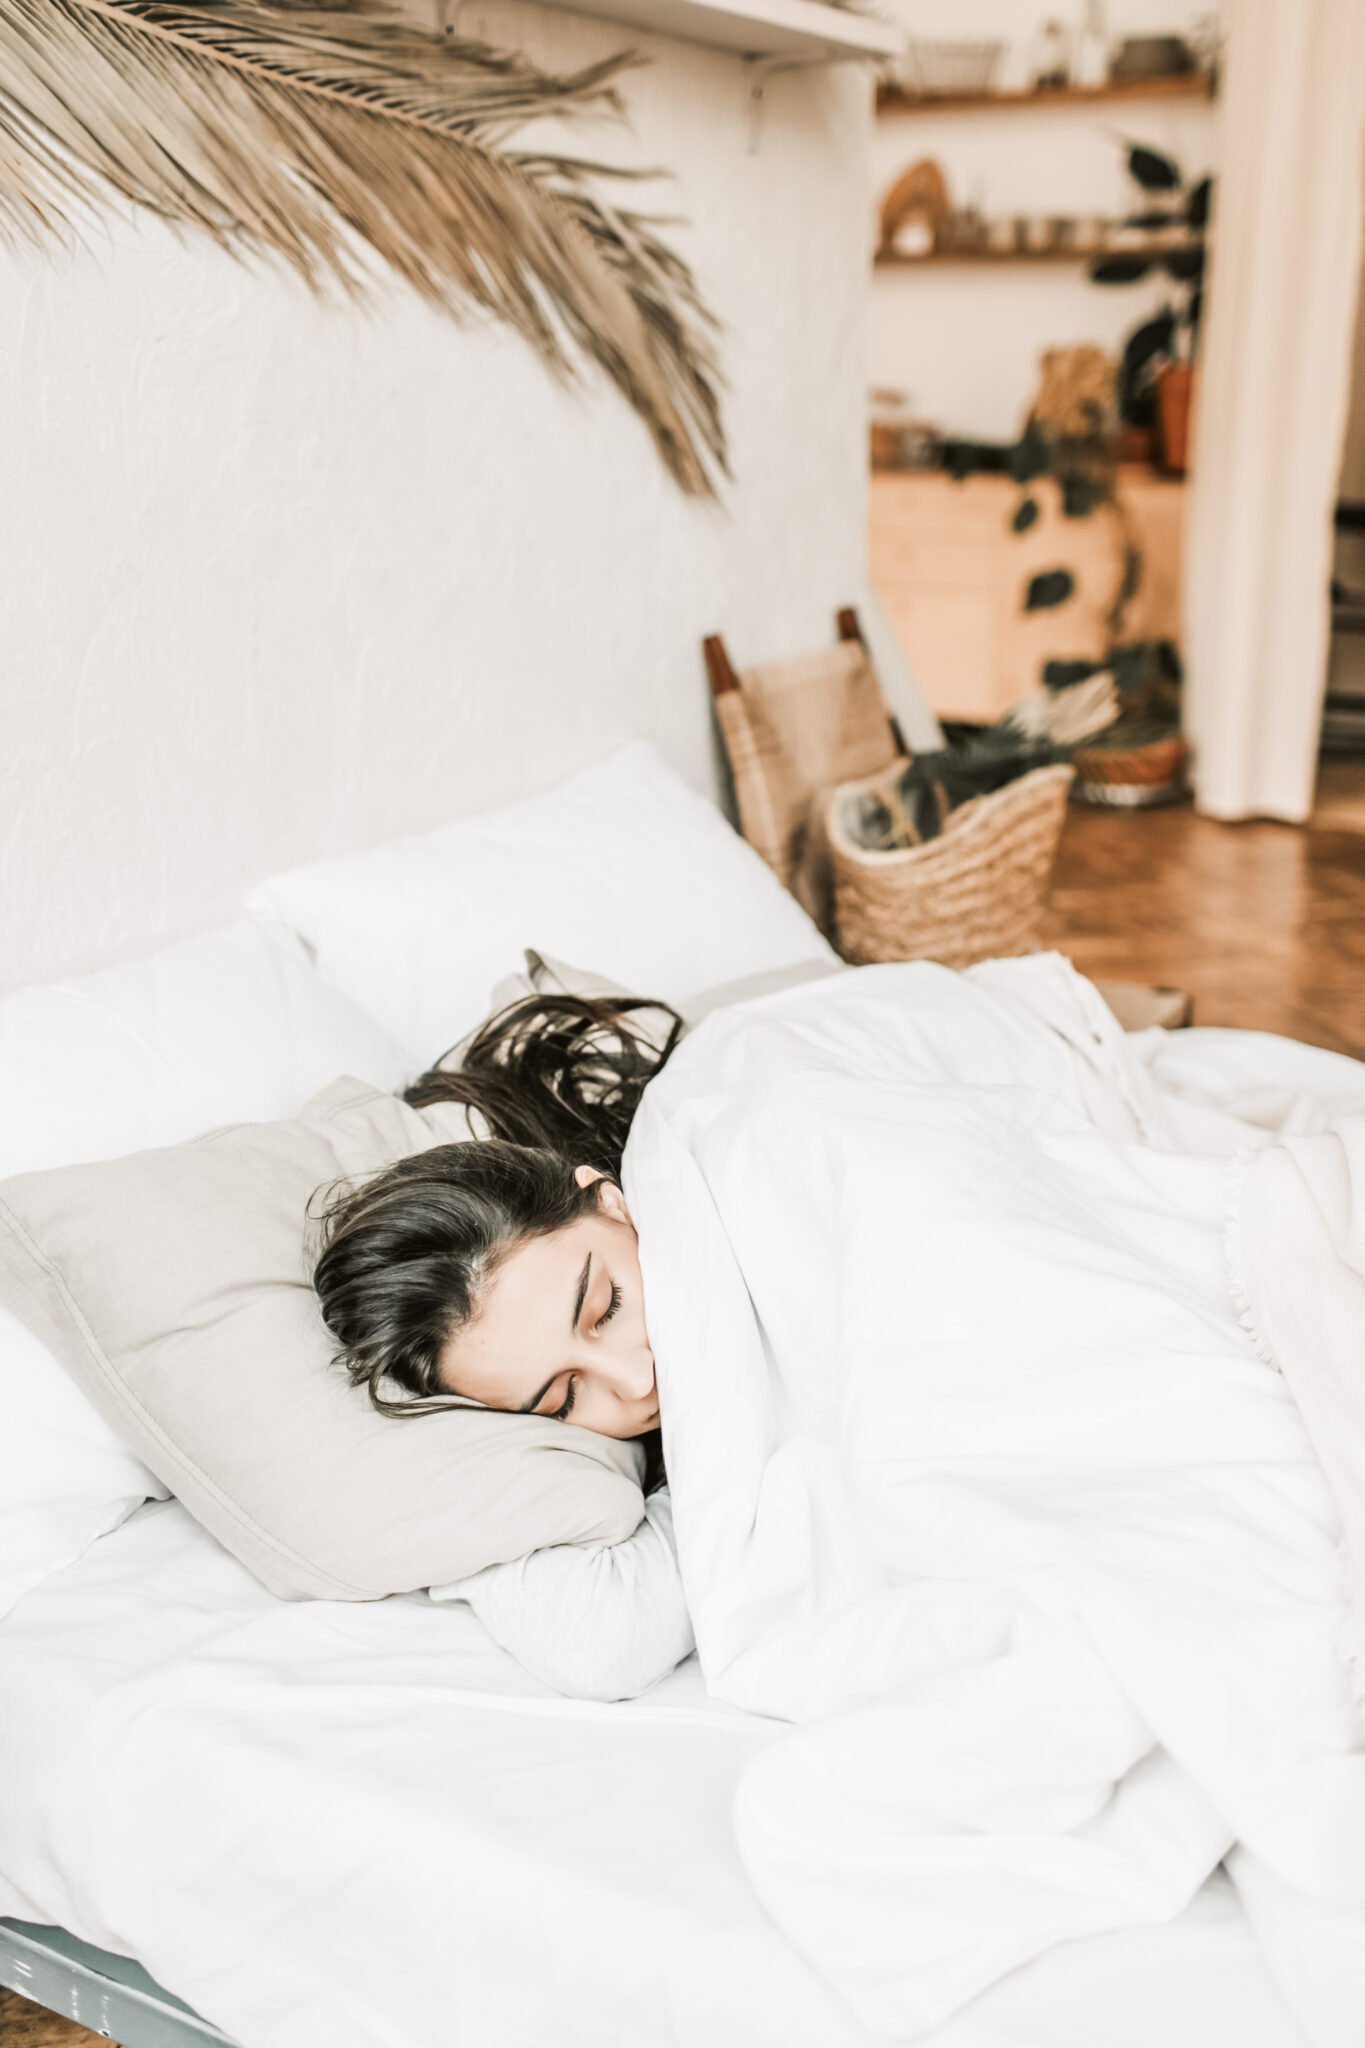 Woman sleeps comfortably in bed. This article covers how to prevent recurring nightmares and sleep better.